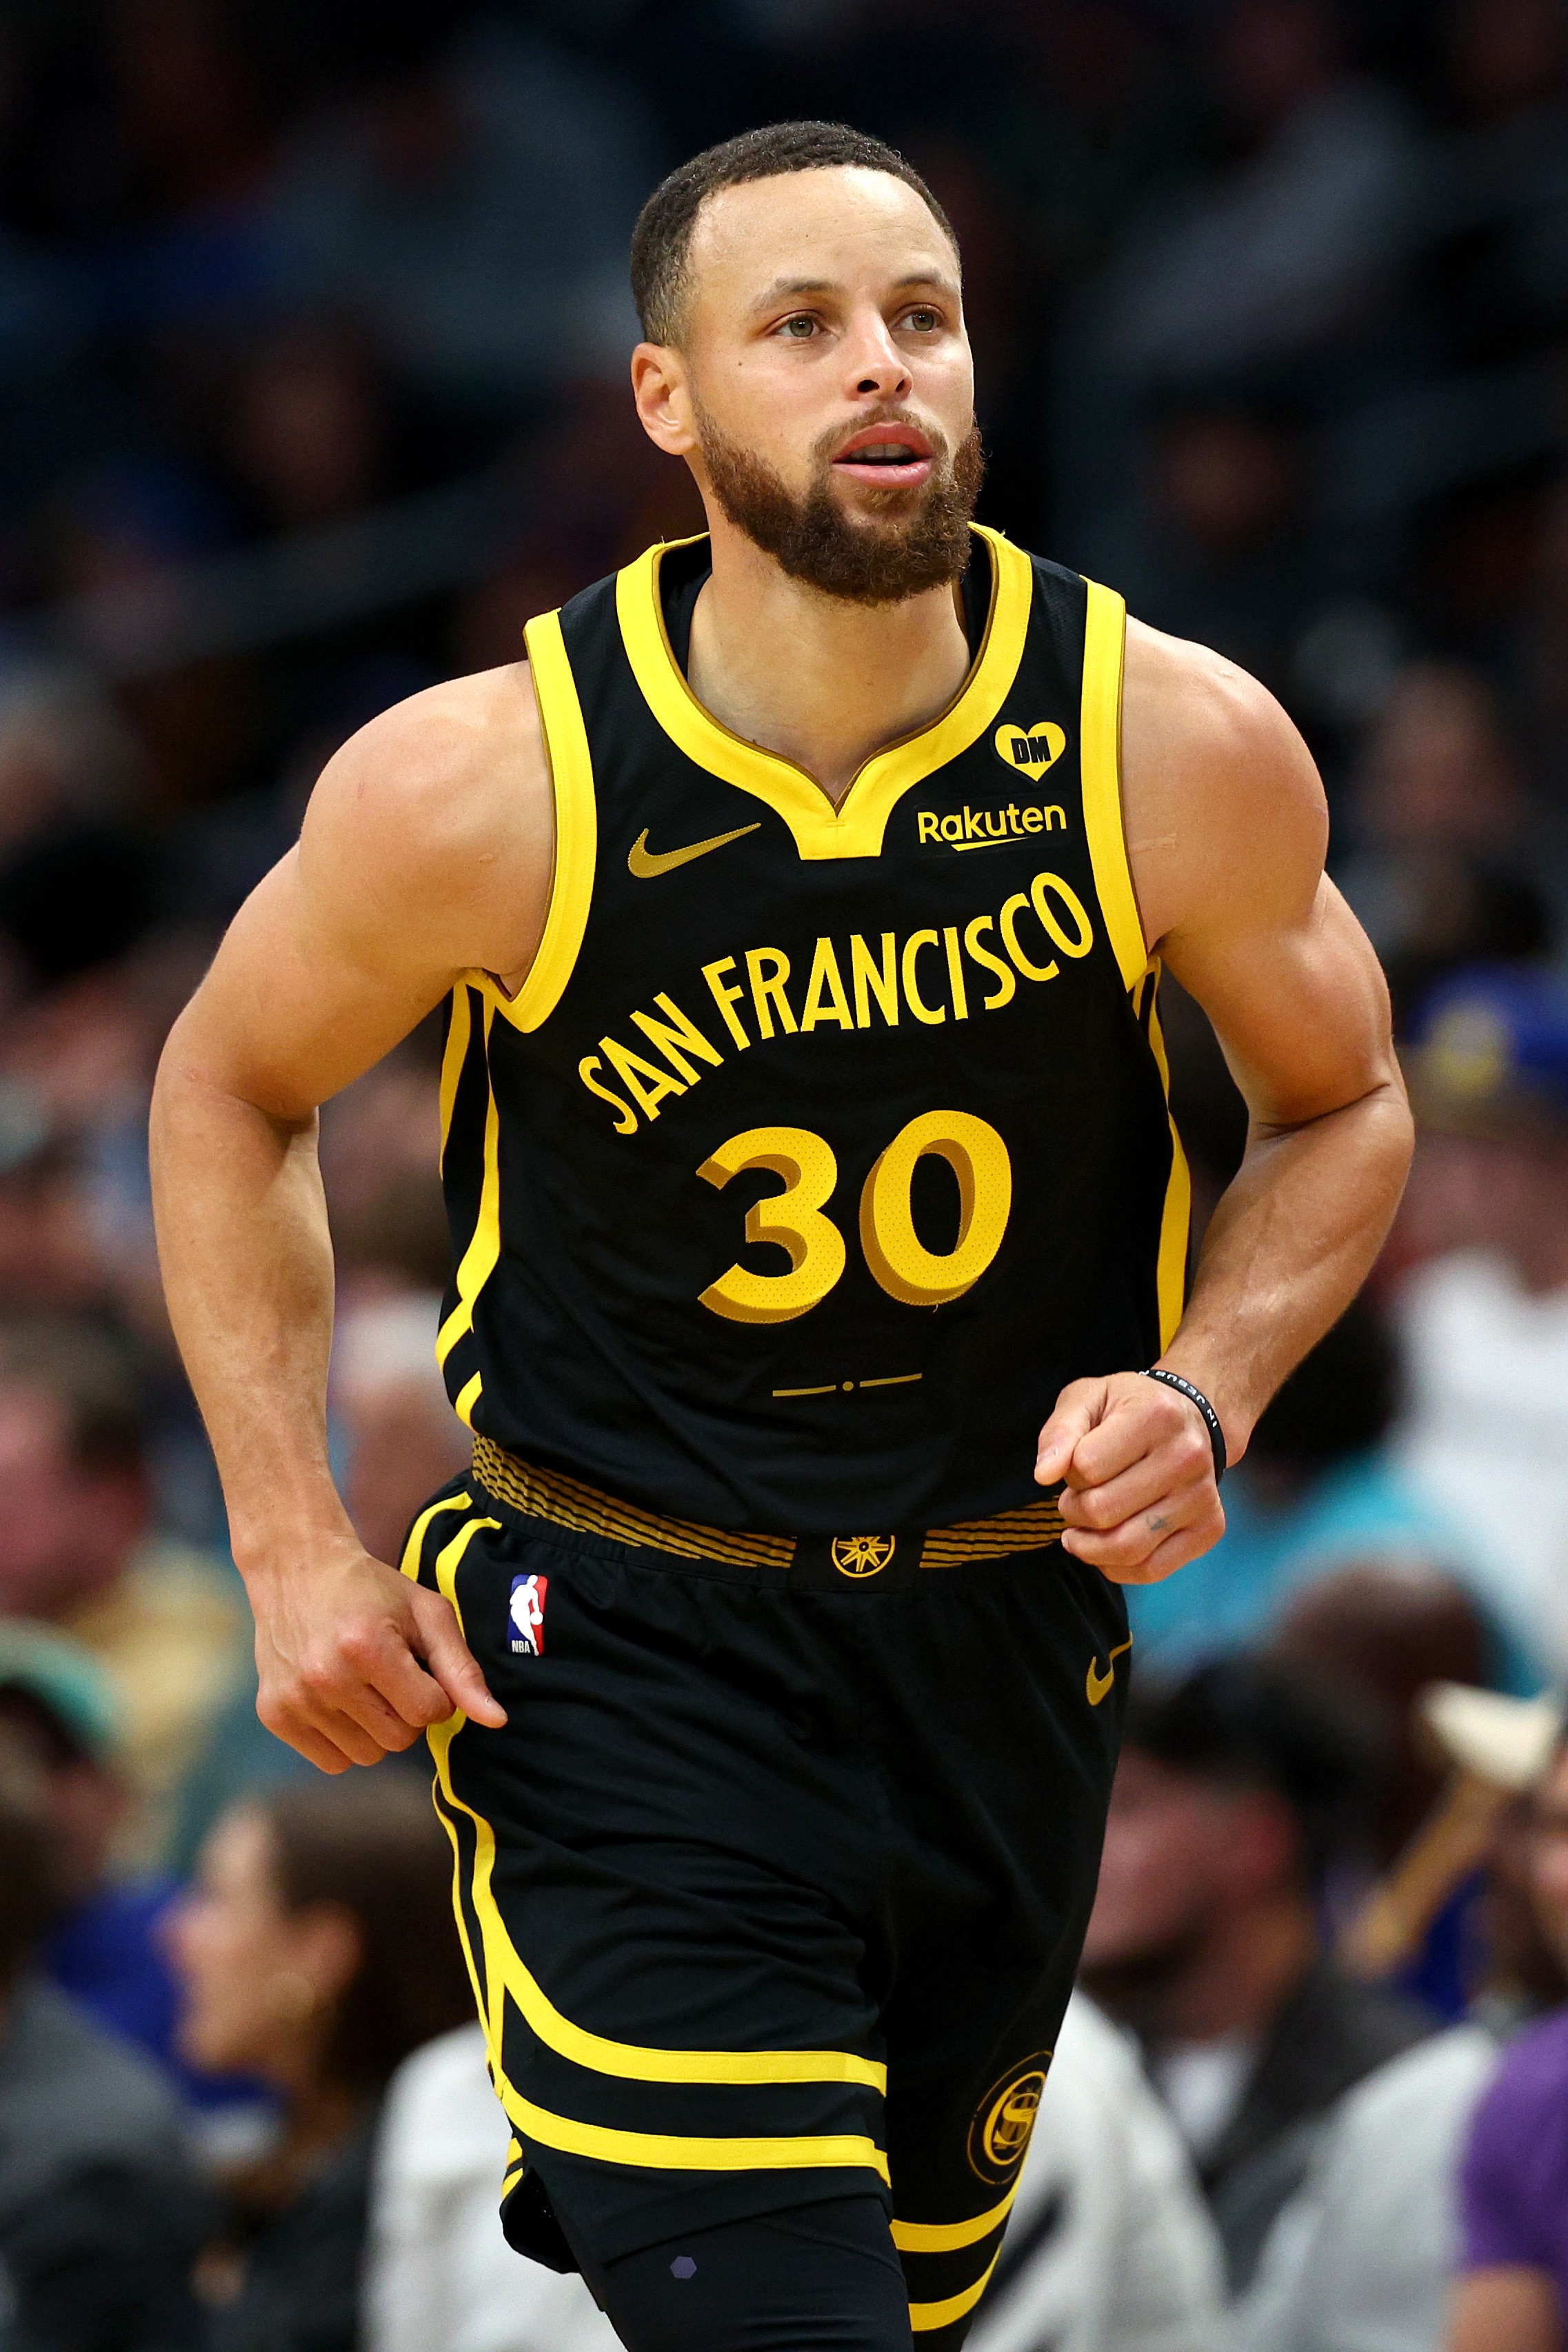 <p>All eyes have been on "Chef" <strong><a href="https://www.brit.co/steph-and-ayesha-curry-2024/">Steph Curry</a></strong> since the beginning of his prestigious basketball career, and somehow he doesn't seem to be slowing down. He's one of the top MVP players who has the skills to back up the title, but he still makes time for his family. Talk about a dream man!</p><p>Specifically, the <strong><a href="https://www.nba.com/player/201939/stephen-curry/bio">NBA</a></strong> reports Steph was one of the Golden State Warrior's early entry candidates in 2009 and has since become a nine-time All-Star player. What else can we say except we're sure he's going to break another record <em>very</em> soon! Wishing him — and the entire Team USA basketball team — the best!</p>